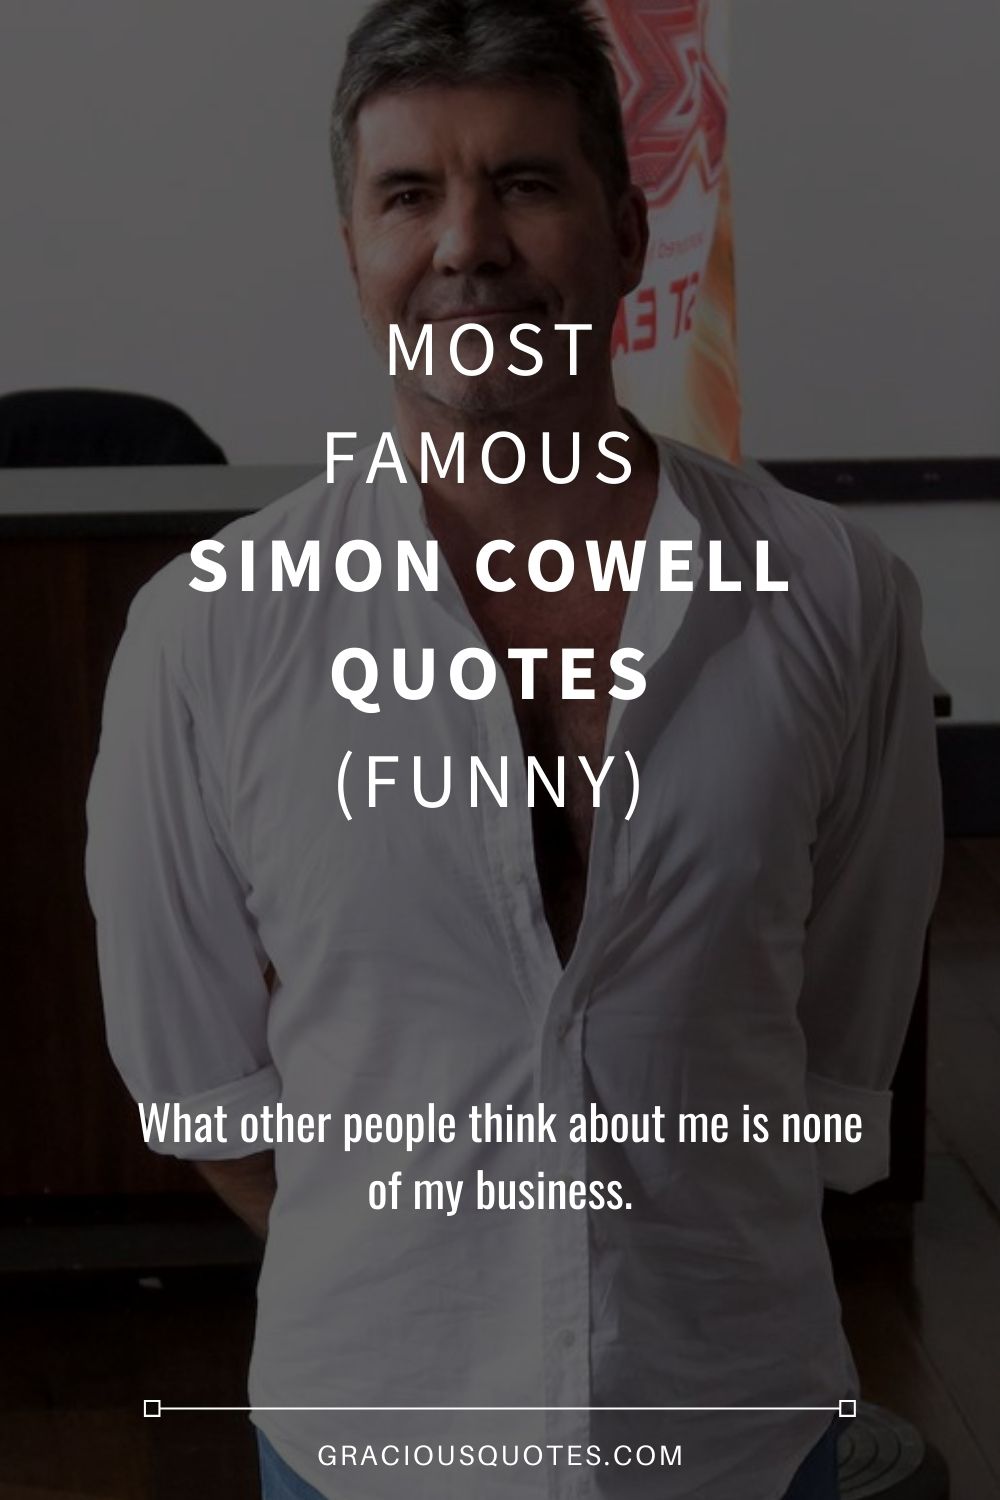 Most Famous Simon Cowell Quotes (FUNNY) - Gracious Quotes